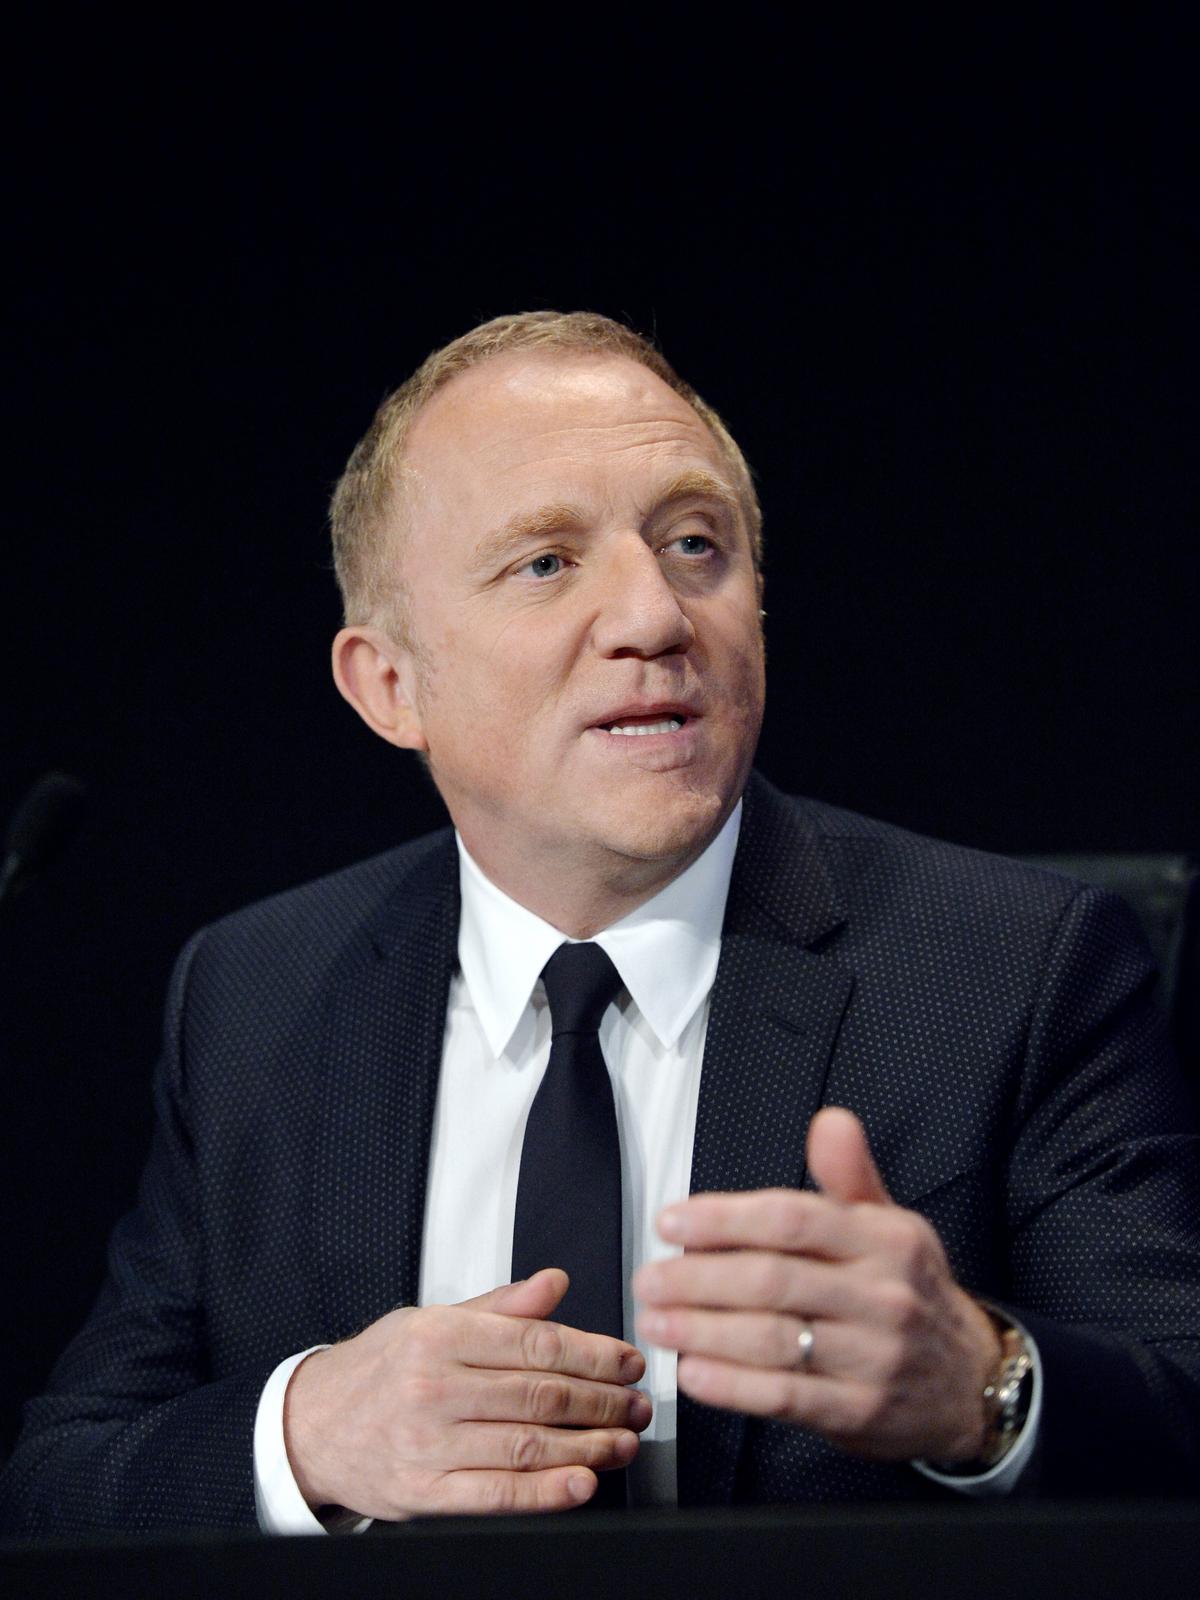 French luxury group Kering CEO Francois-Henri Pinault gestures as he speaks before the group's general meeting on April 23, 2015 in Paris. Share prices of French luxury and sports clothing group Kering fell sharply in Paris on April 22 on news of disappointing first quarter performance by its Gucci unit, which accounts for 60 percent of group profit. (MIGUEL MEDINA/AFP/Getty Images)